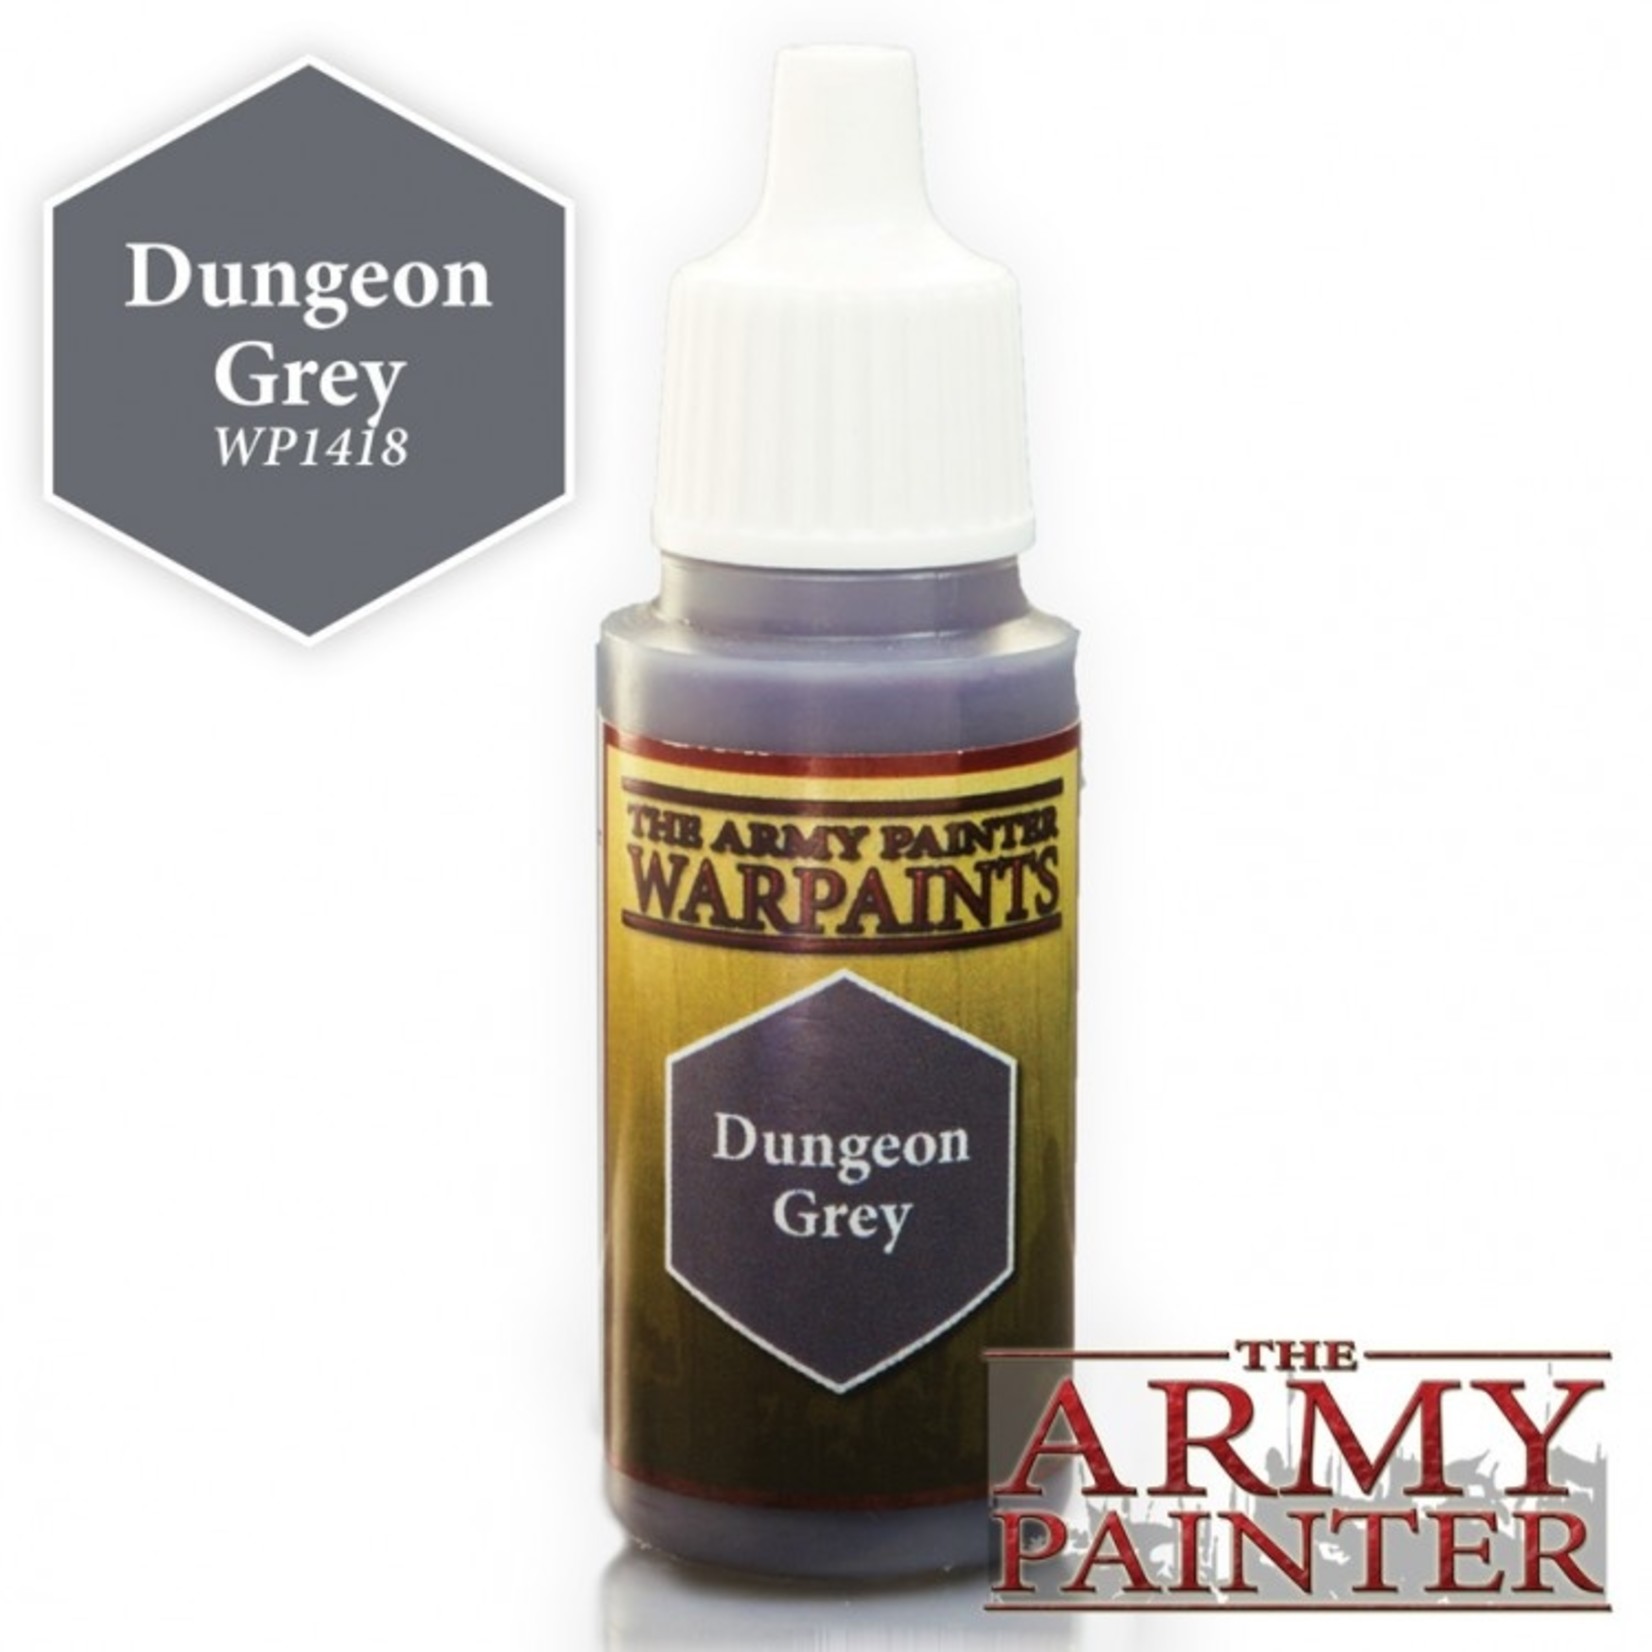 The Army Painter The Army Painter Dungeon Grey 18ml